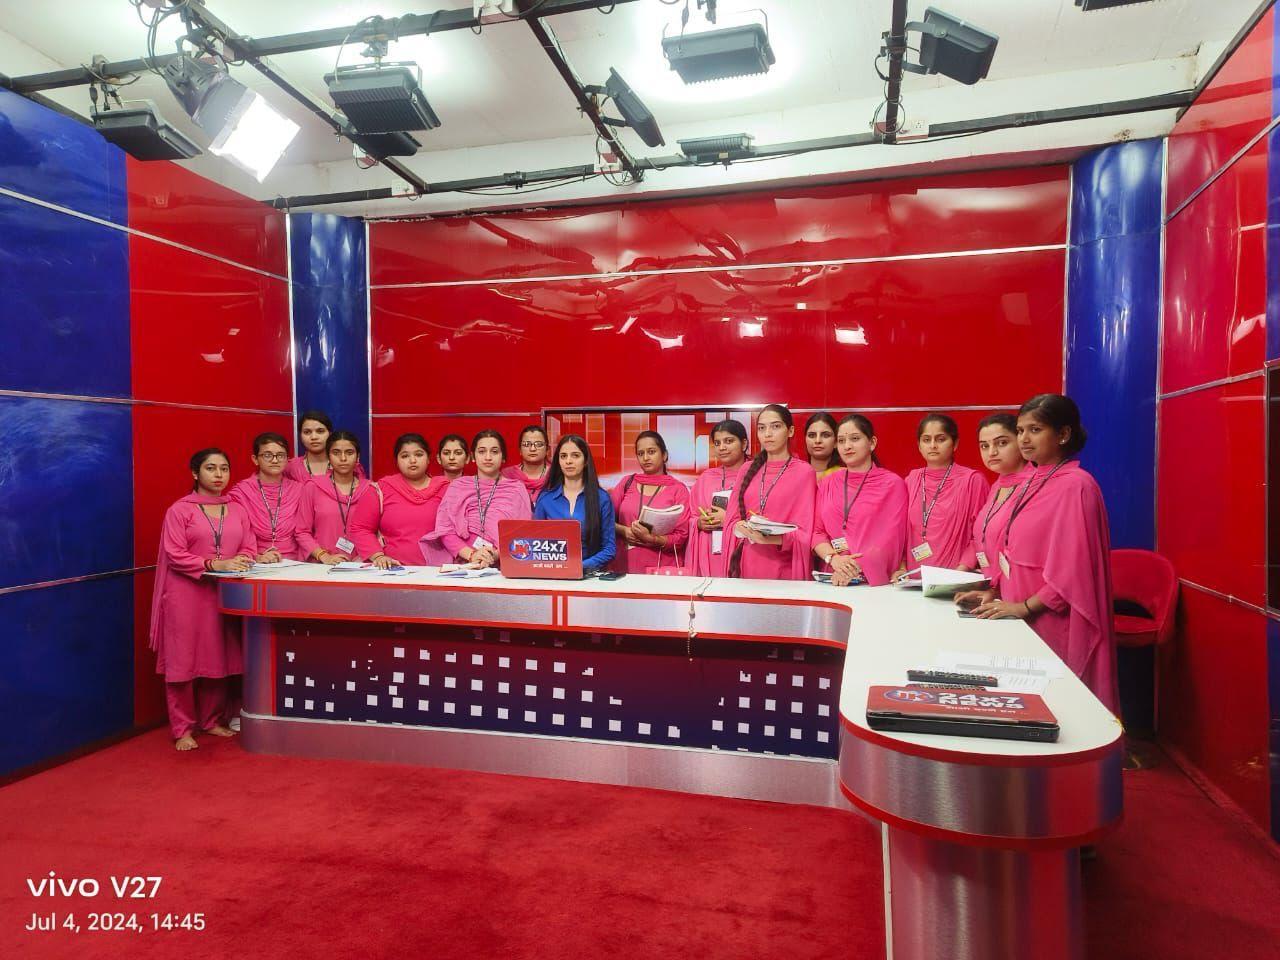 Dogra College of Education organised a visit to JK Television Centre